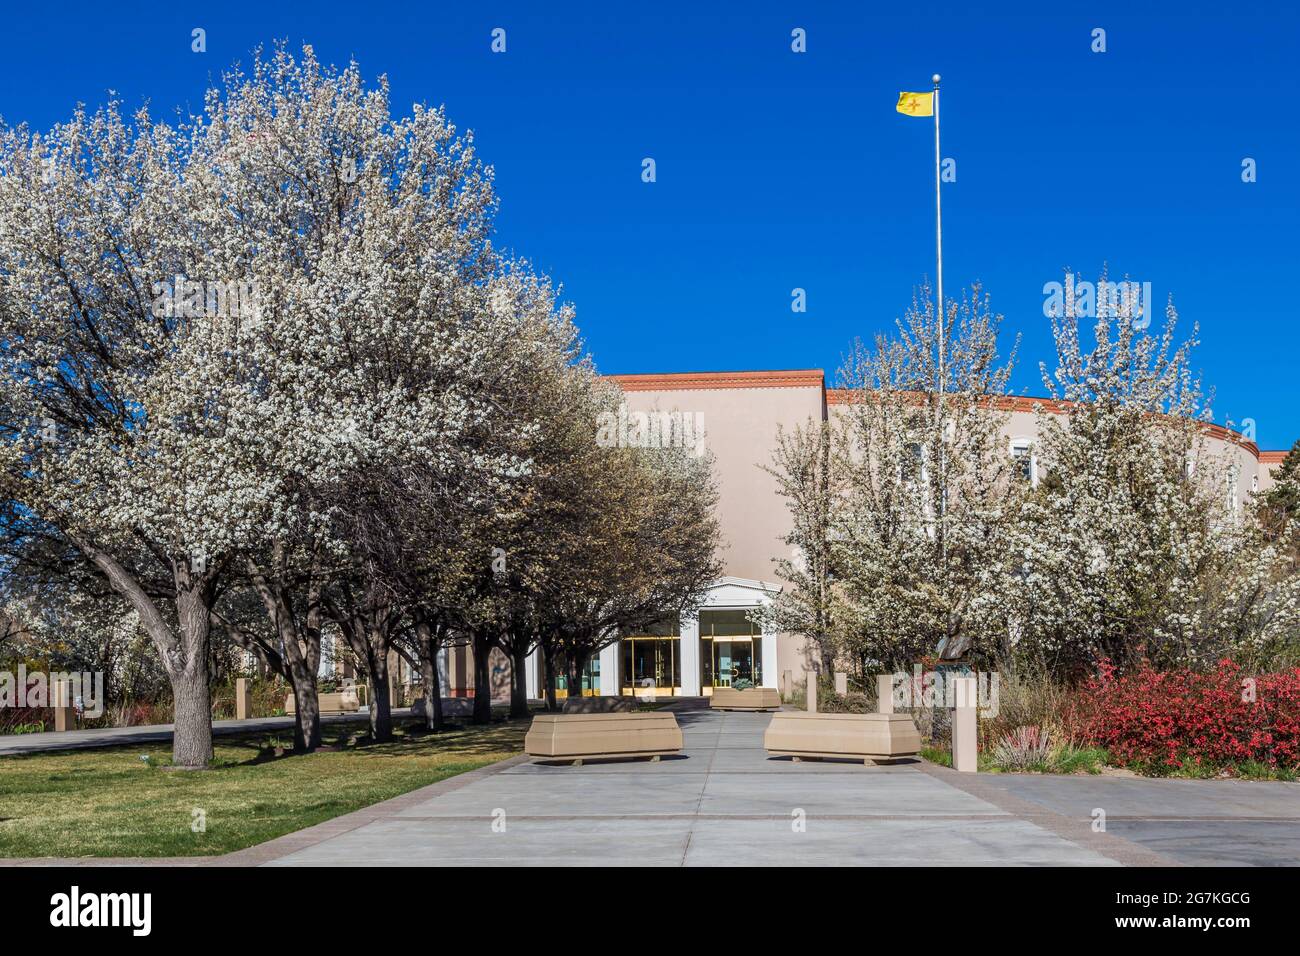 Santa Fe, New Mexico, USA, April 7, 2014: State Capital, building, with pear trees in blossom. Stock Photo